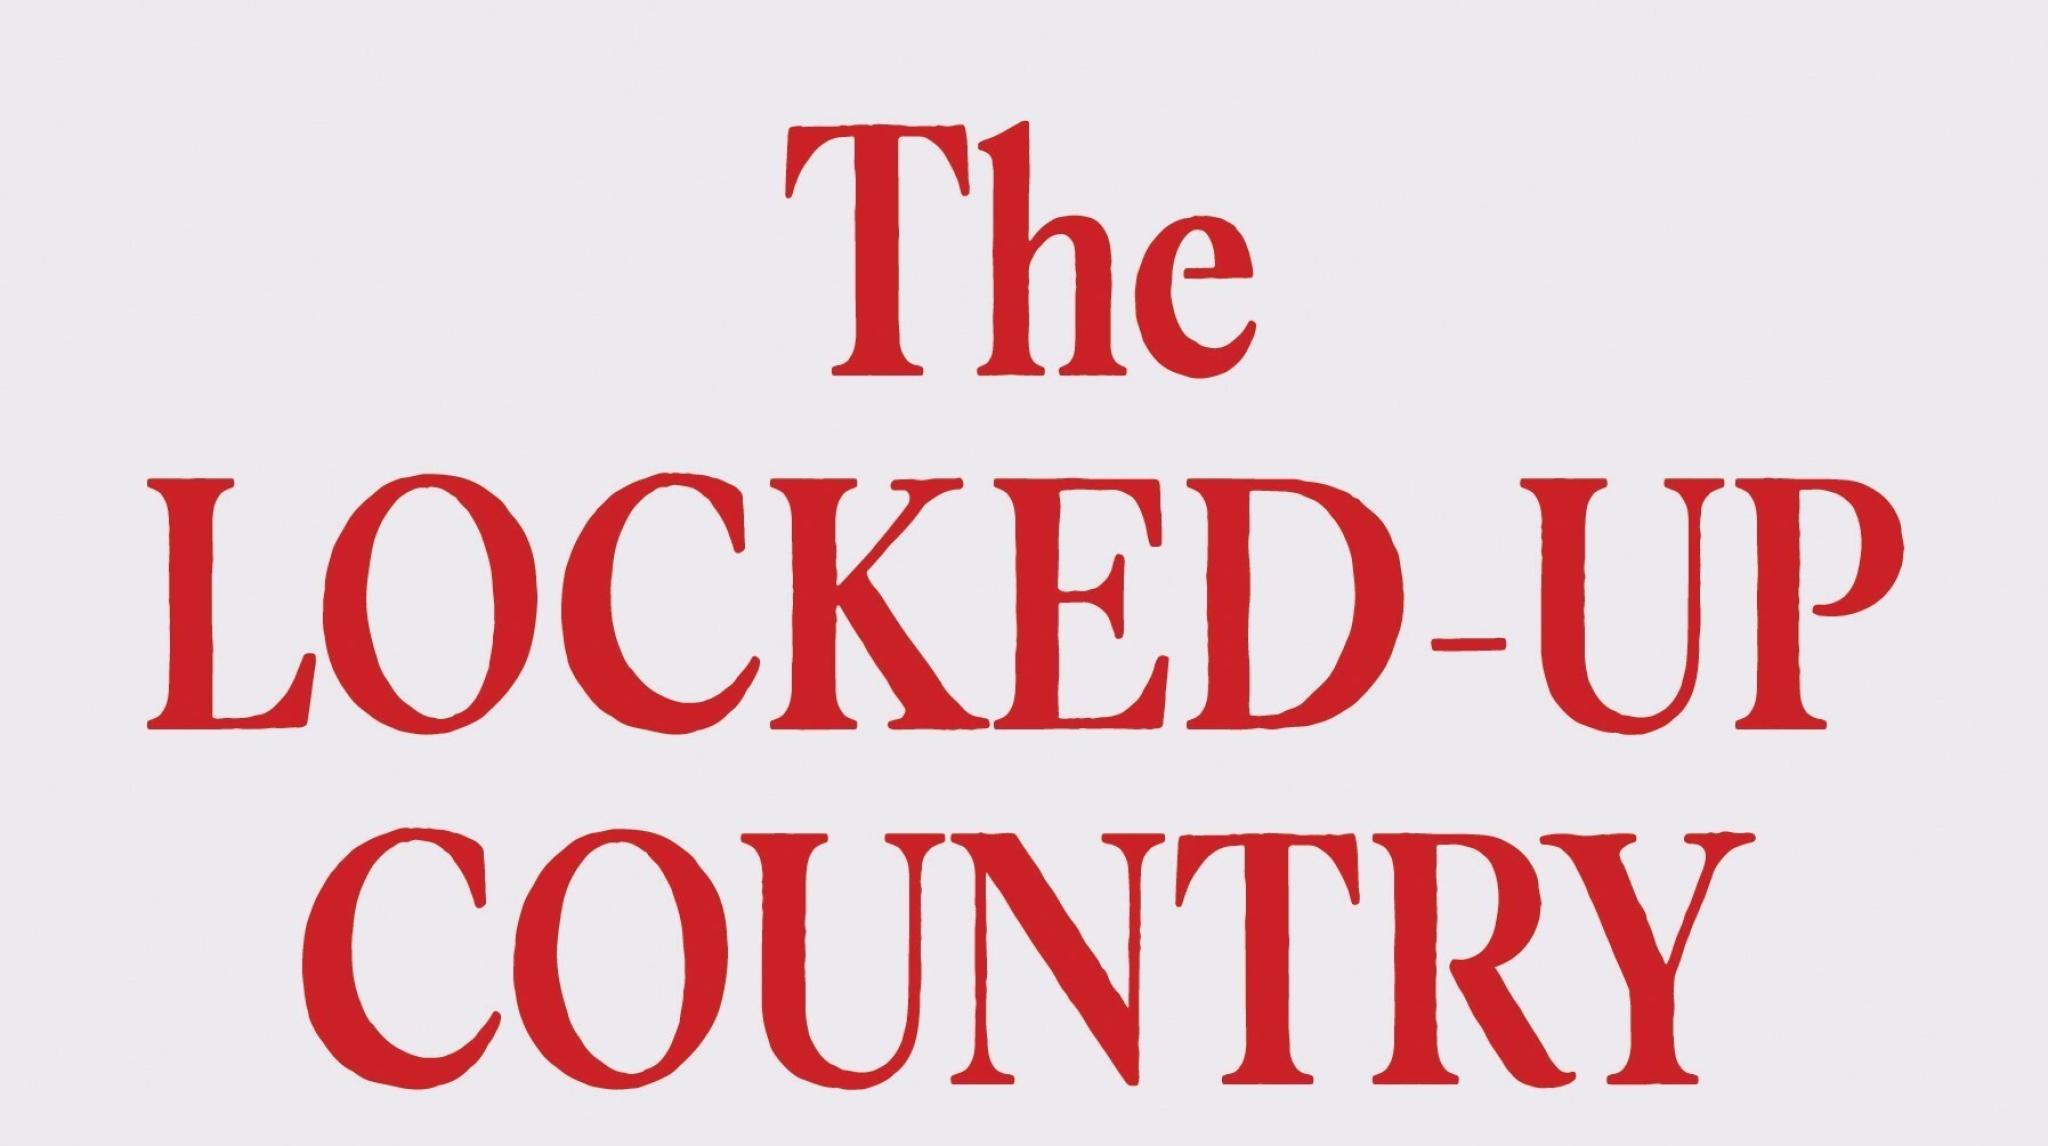 The locked-up country